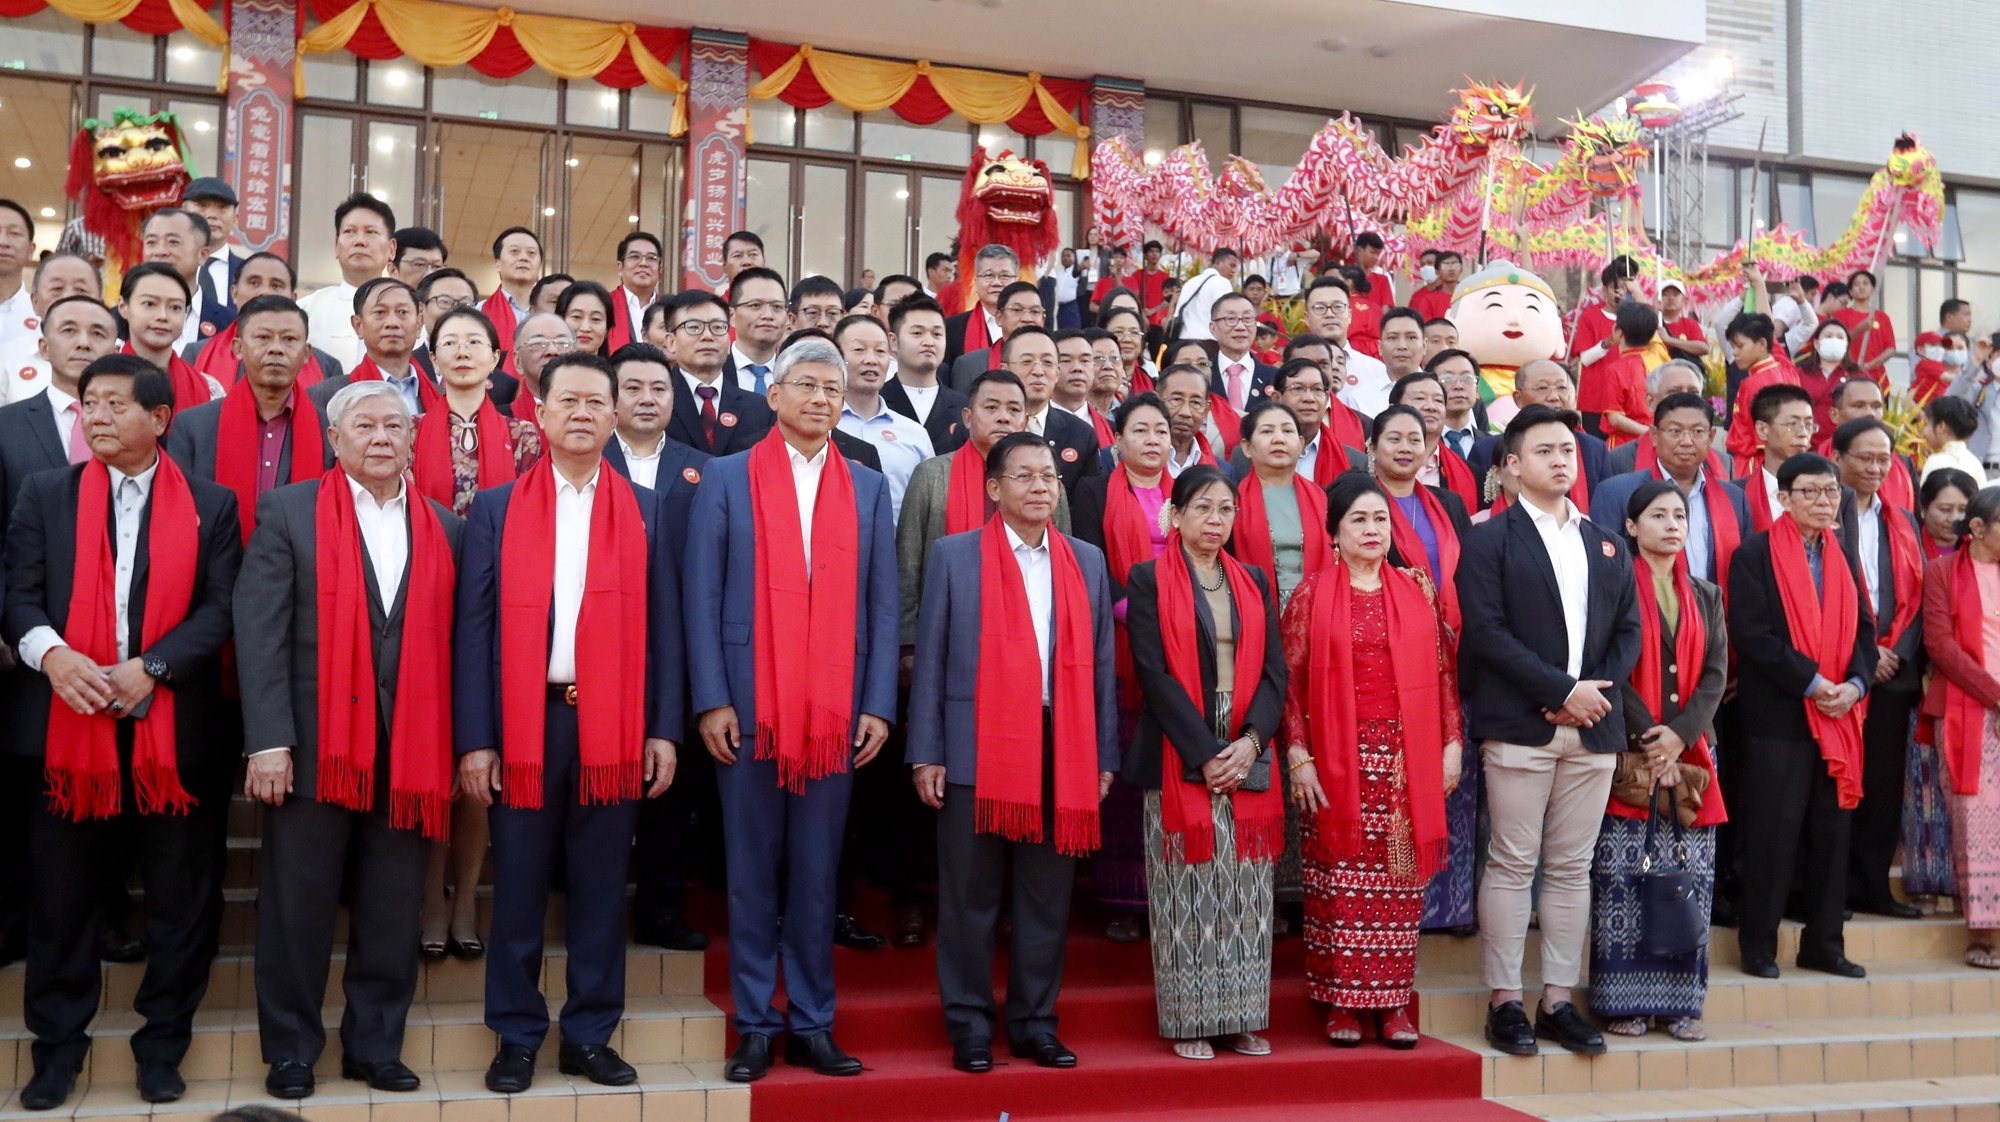 epa10420760 Myanmar military chief Senior General Min Aung Hlaing (C-R) and Chinese ambassador to Myanmar Chen Hai (C-L) pose for group photo during the opening ceremony of the Chinese new year celebration at the Thuwanna Indoor Stadium, in Yangon, Myanmar, 21 January 2023. The Chinese lunar new year, also called &#039;Spring Festival&#039;, falls on 22 January 2023, marking the beginning of the Year of the Rabbit.  EPA/NYEIN CHAN NAING